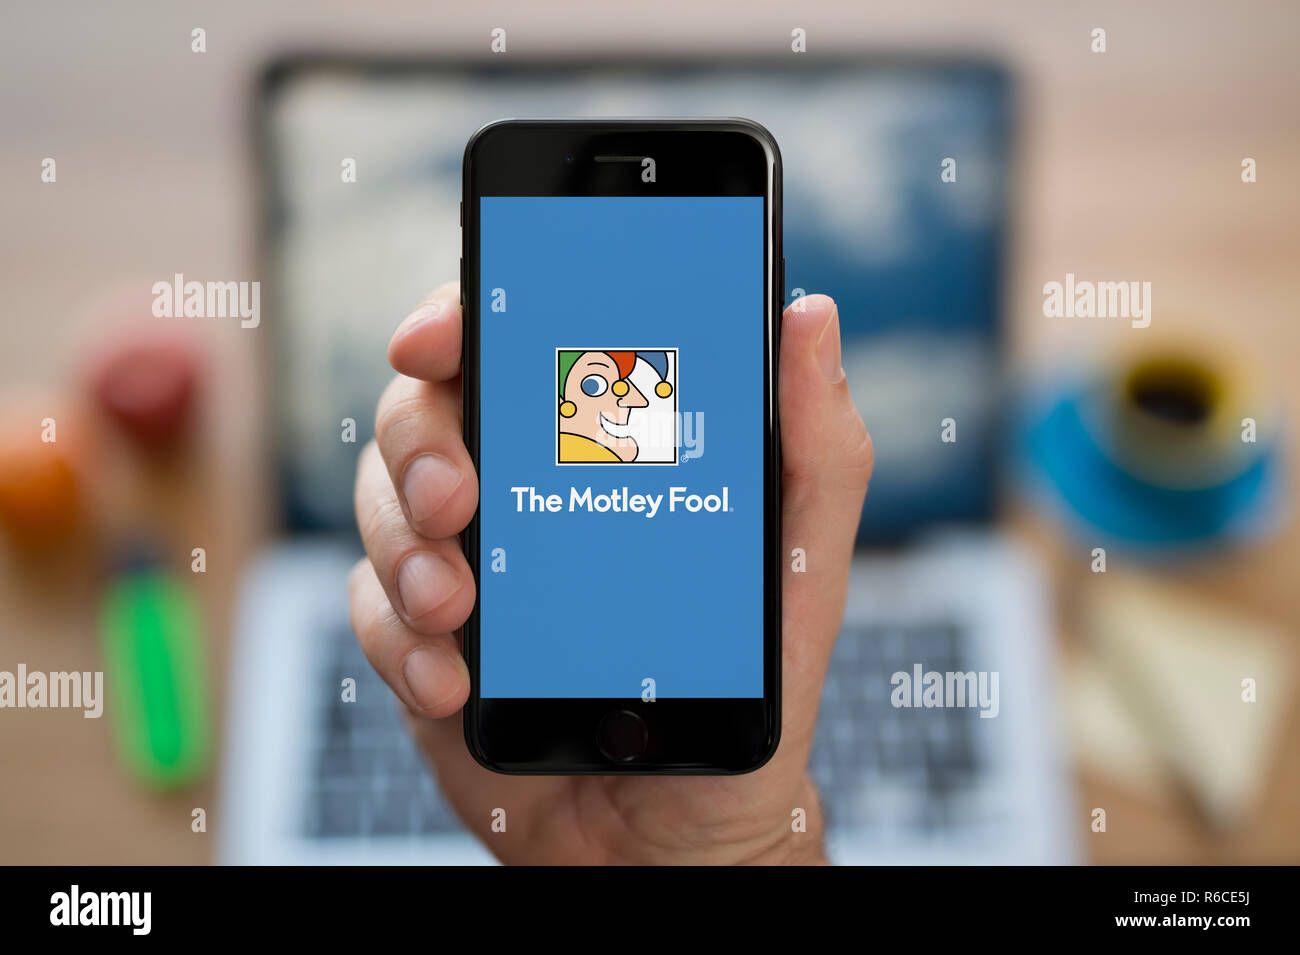 A man looks at his iPhone which displays The Motley Fool logo, while sat at his computer desk (Editorial use only). Stock Photo